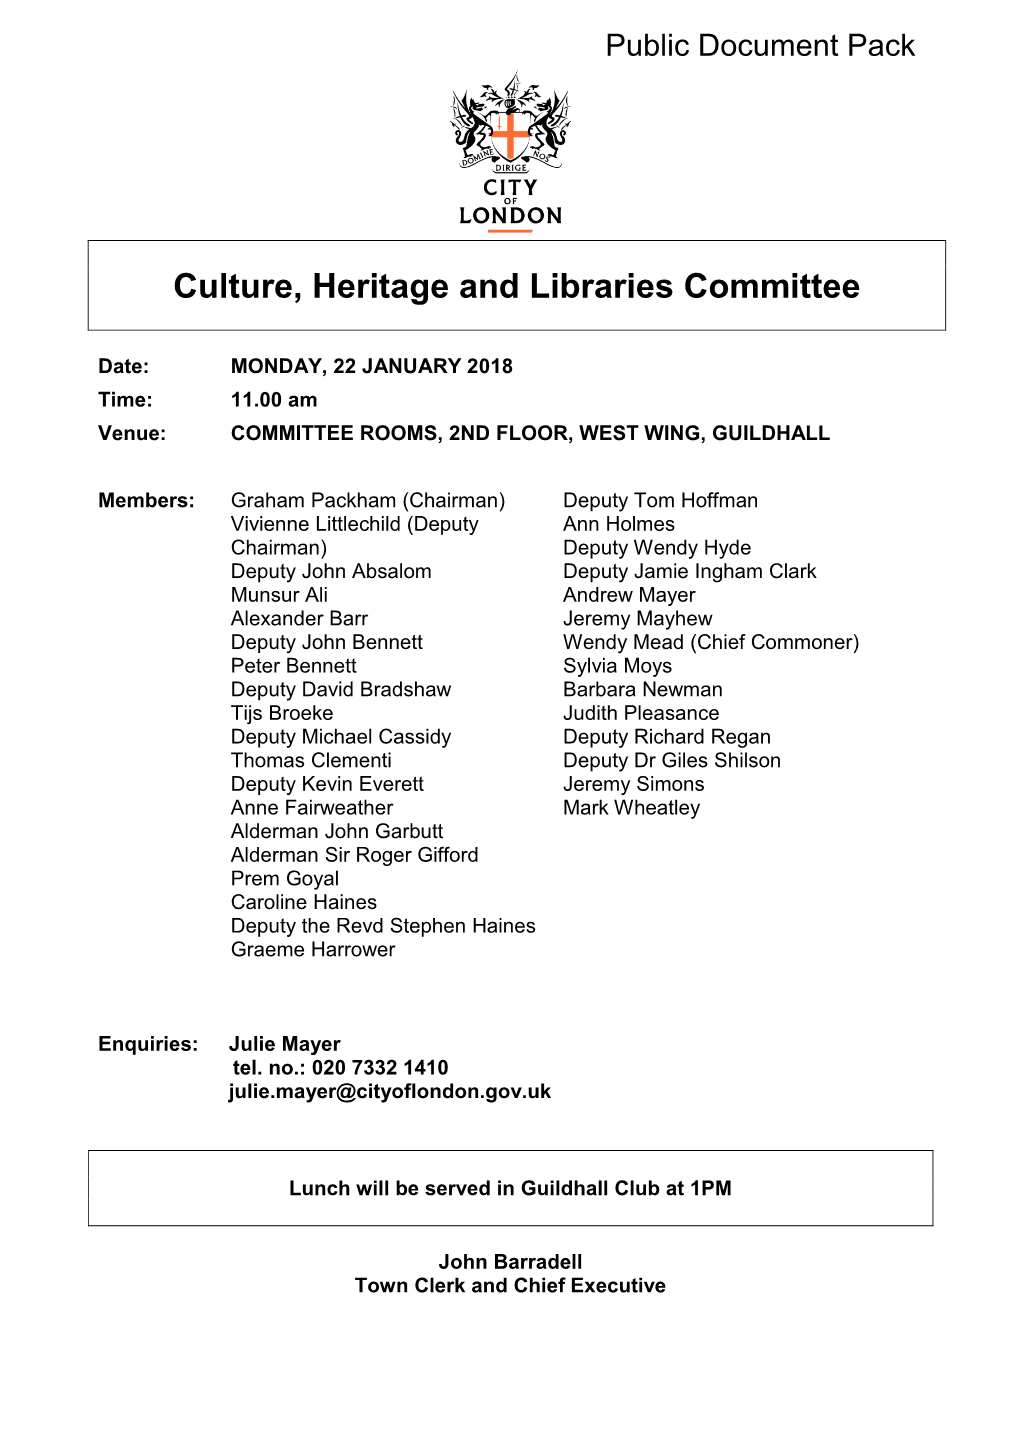 (Public Pack)Agenda Document for Culture, Heritage and Libraries